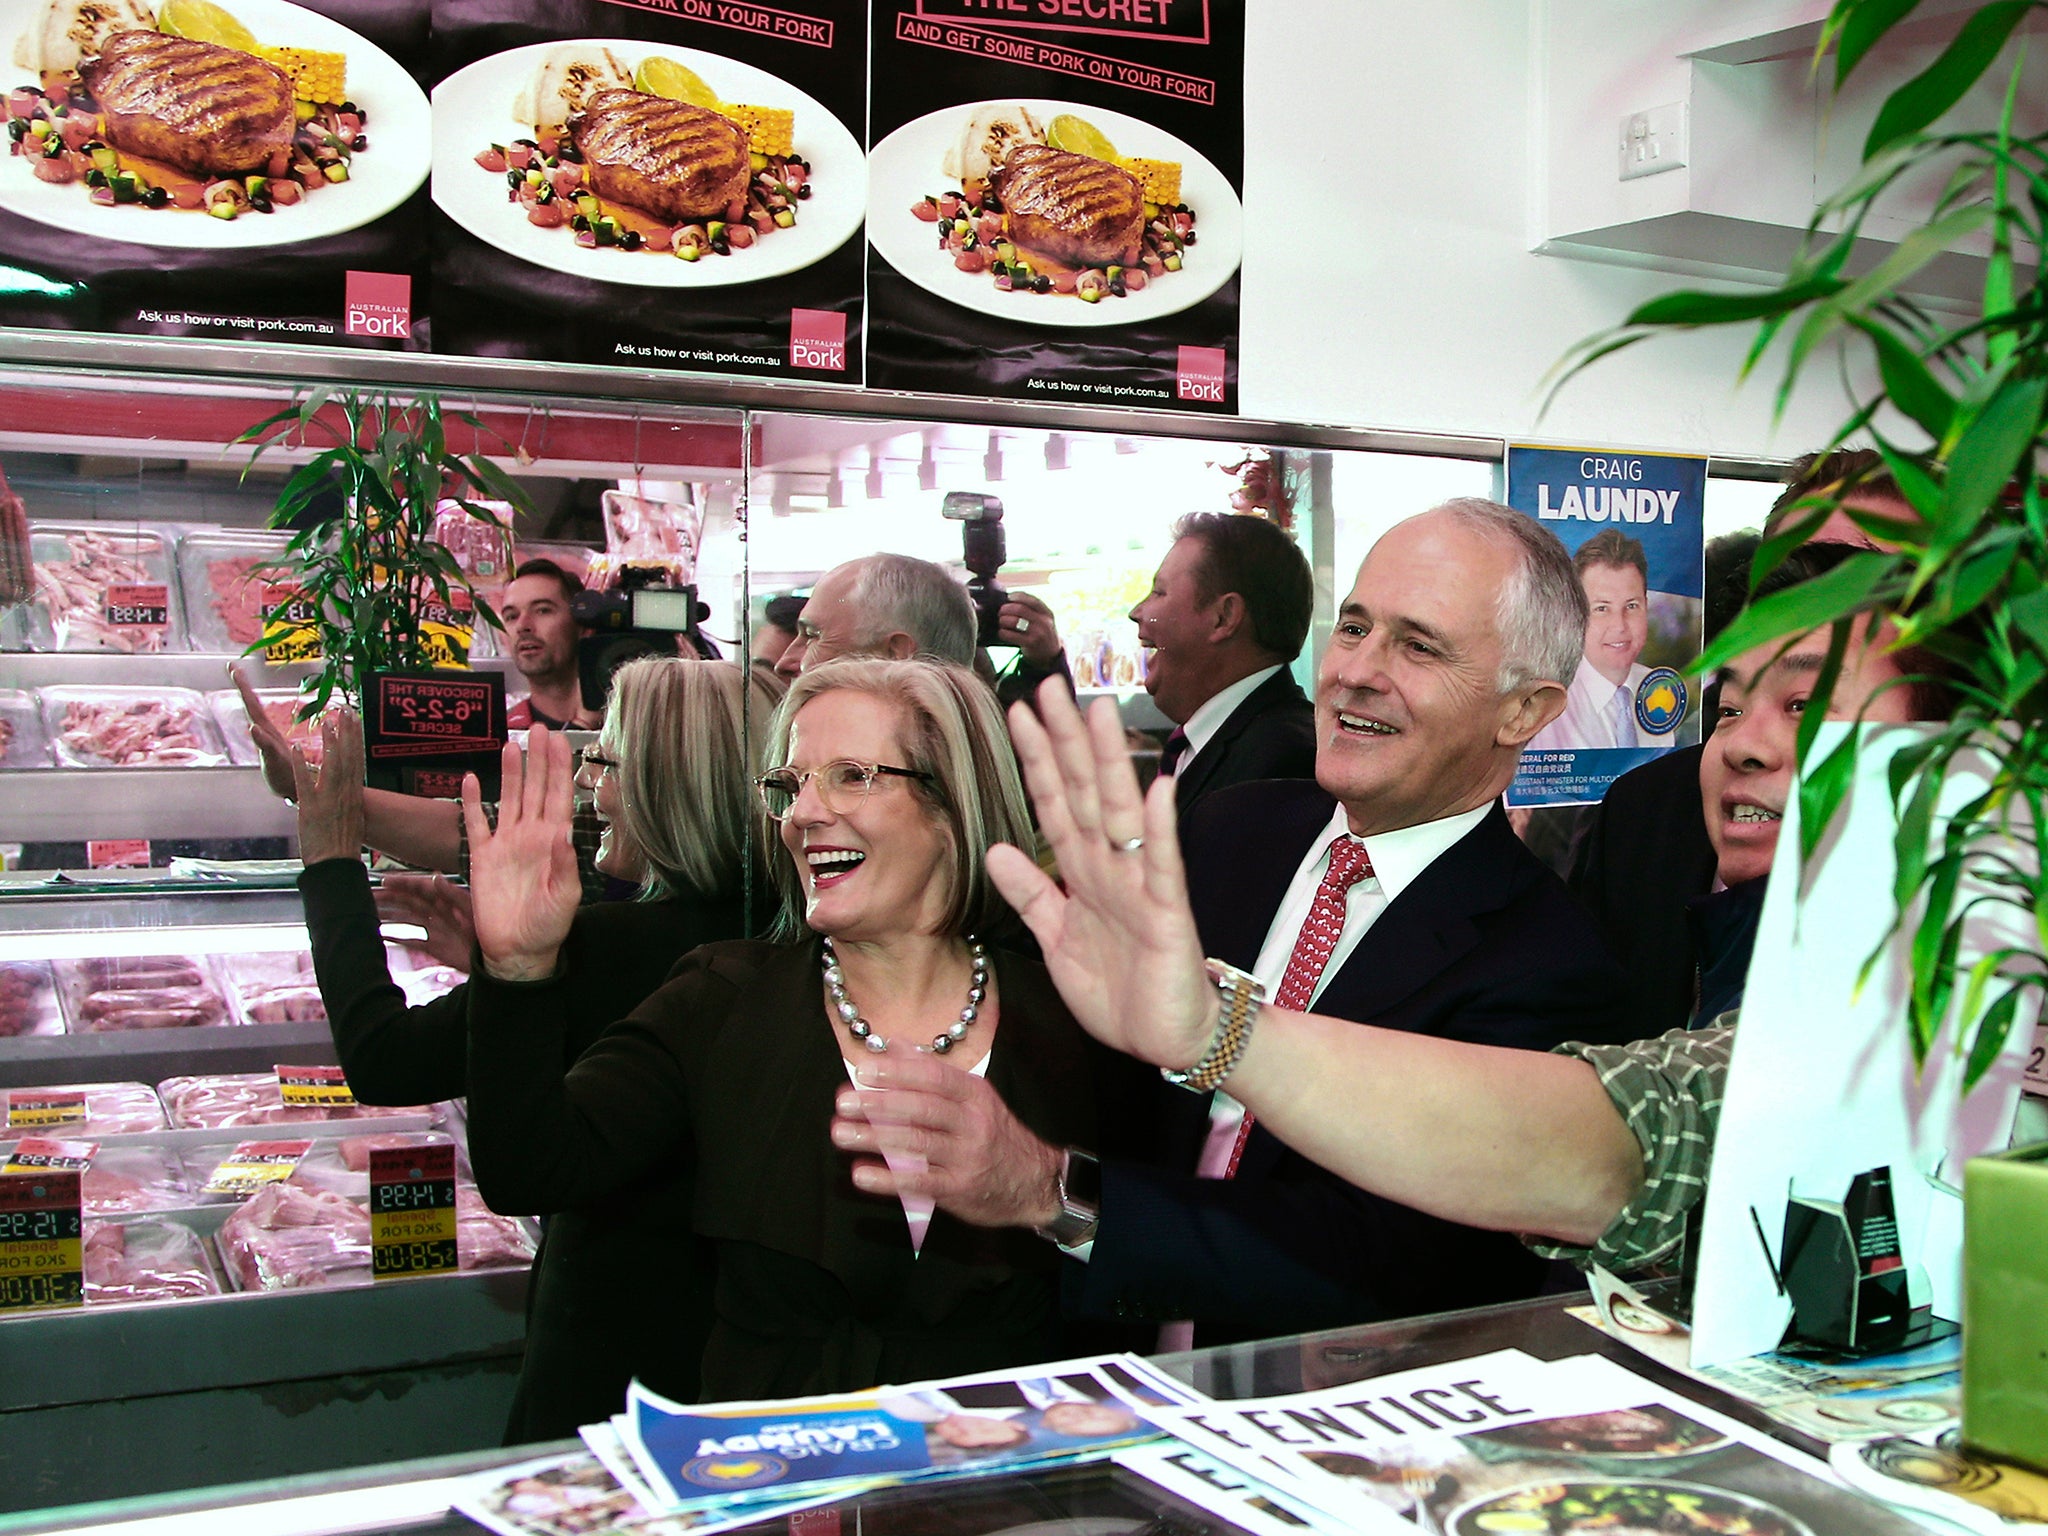 Australia's Prime Minister Malcolm Turnbull greets customers in a Sydney butcher's shop on his way to pick up a 'democracy sausage'